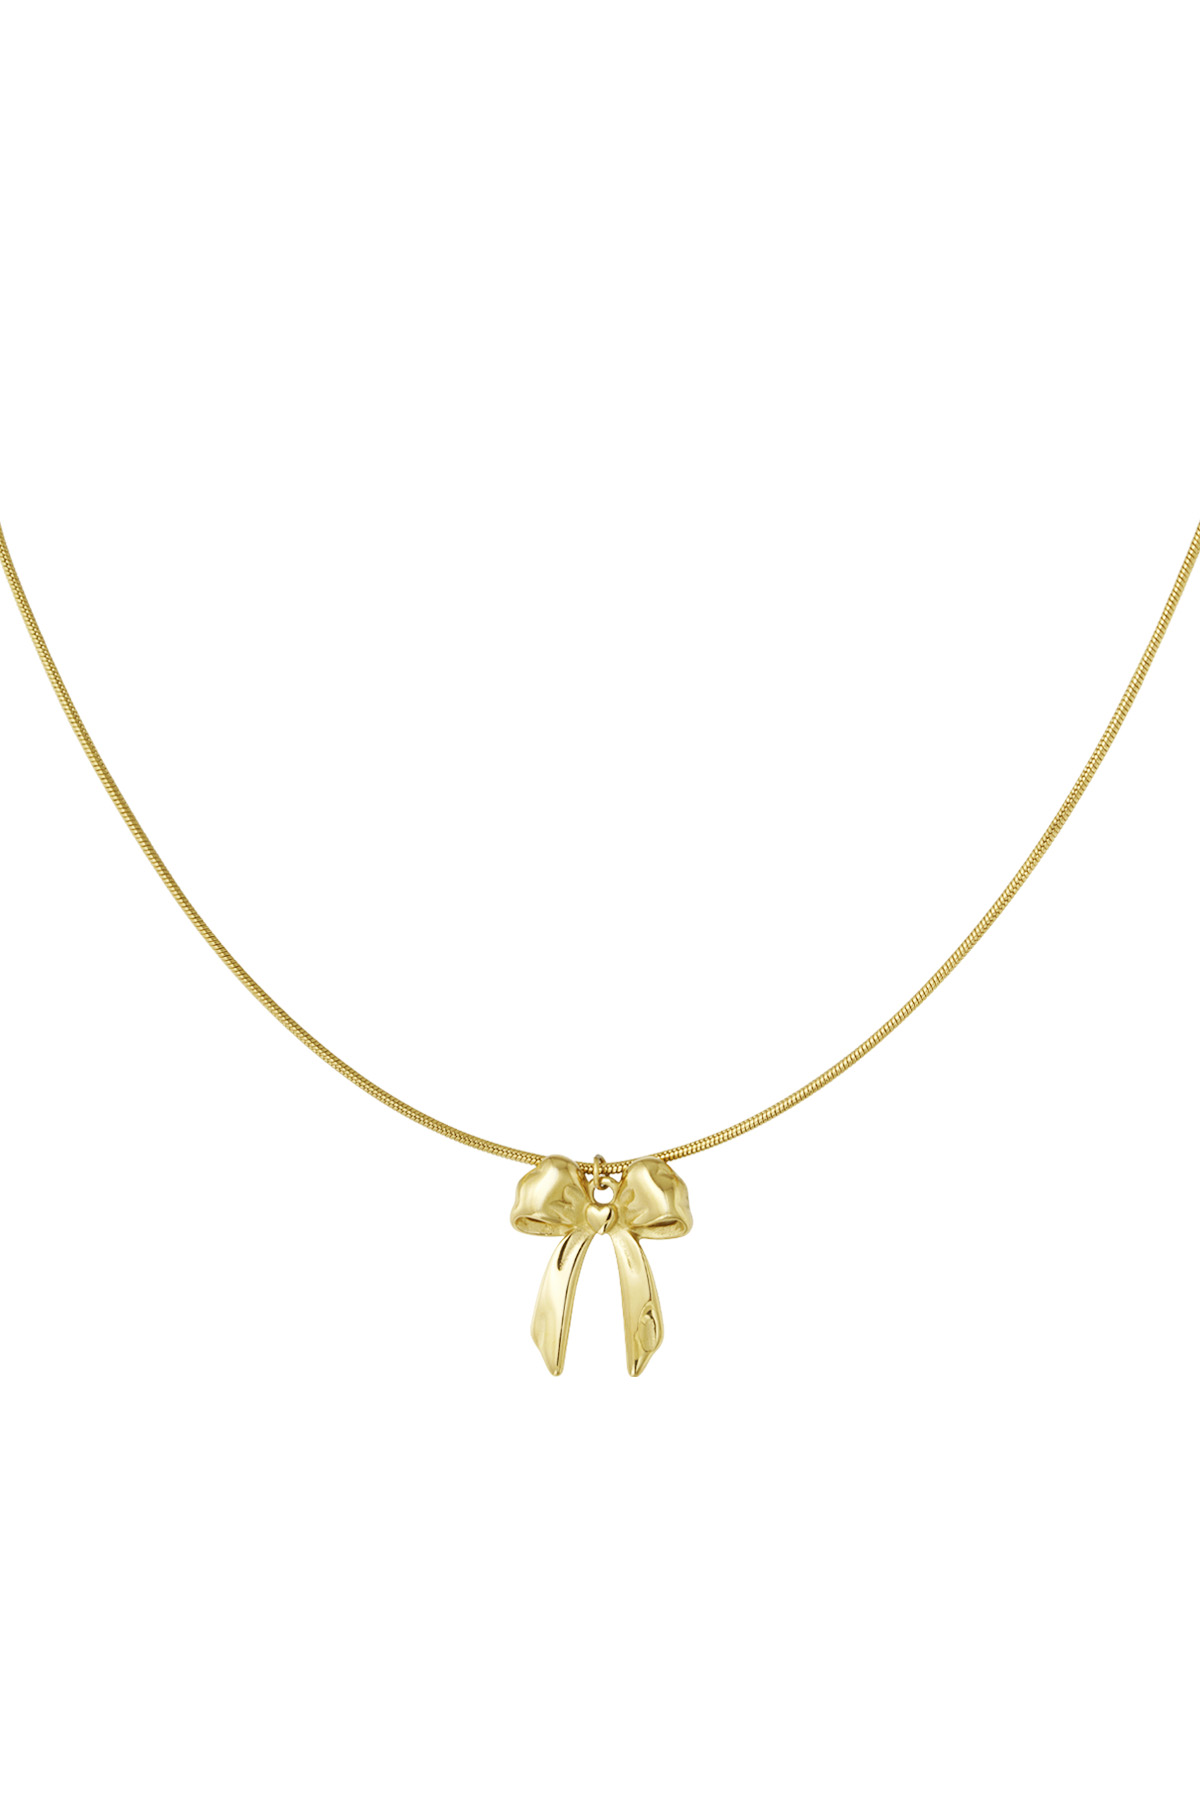 Classic necklace with large bow - gold  h5 